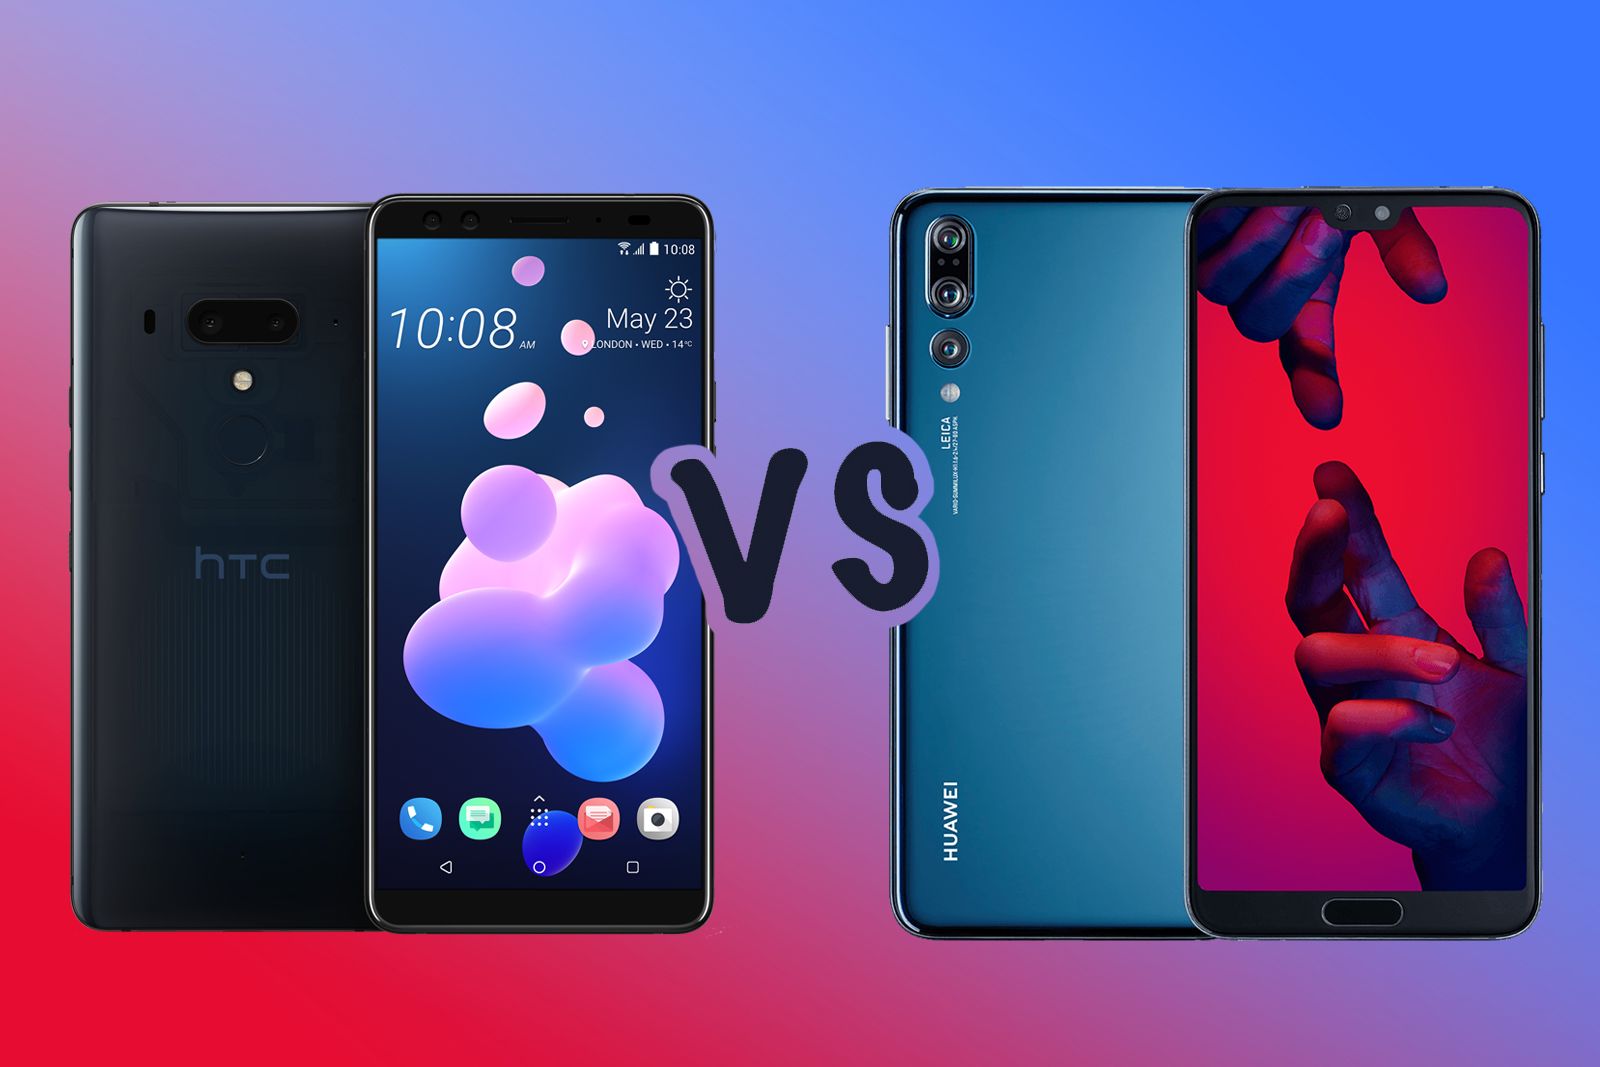 HTC U12+ vs Huawei Pro: What's the difference?